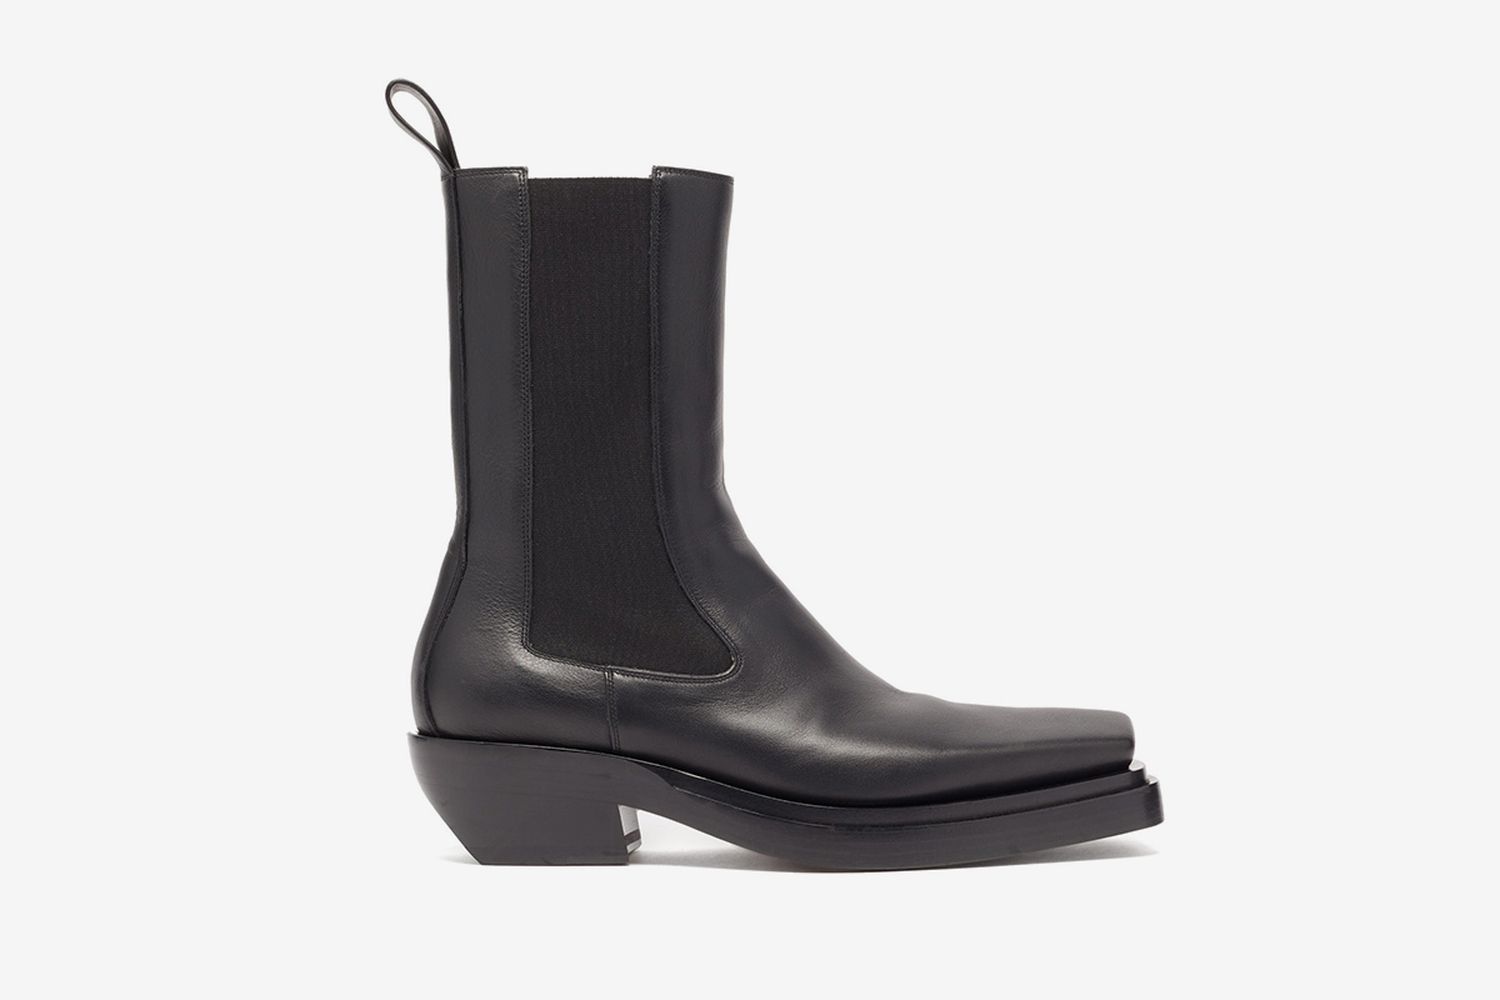 The Lean Leather Chelsea Boots